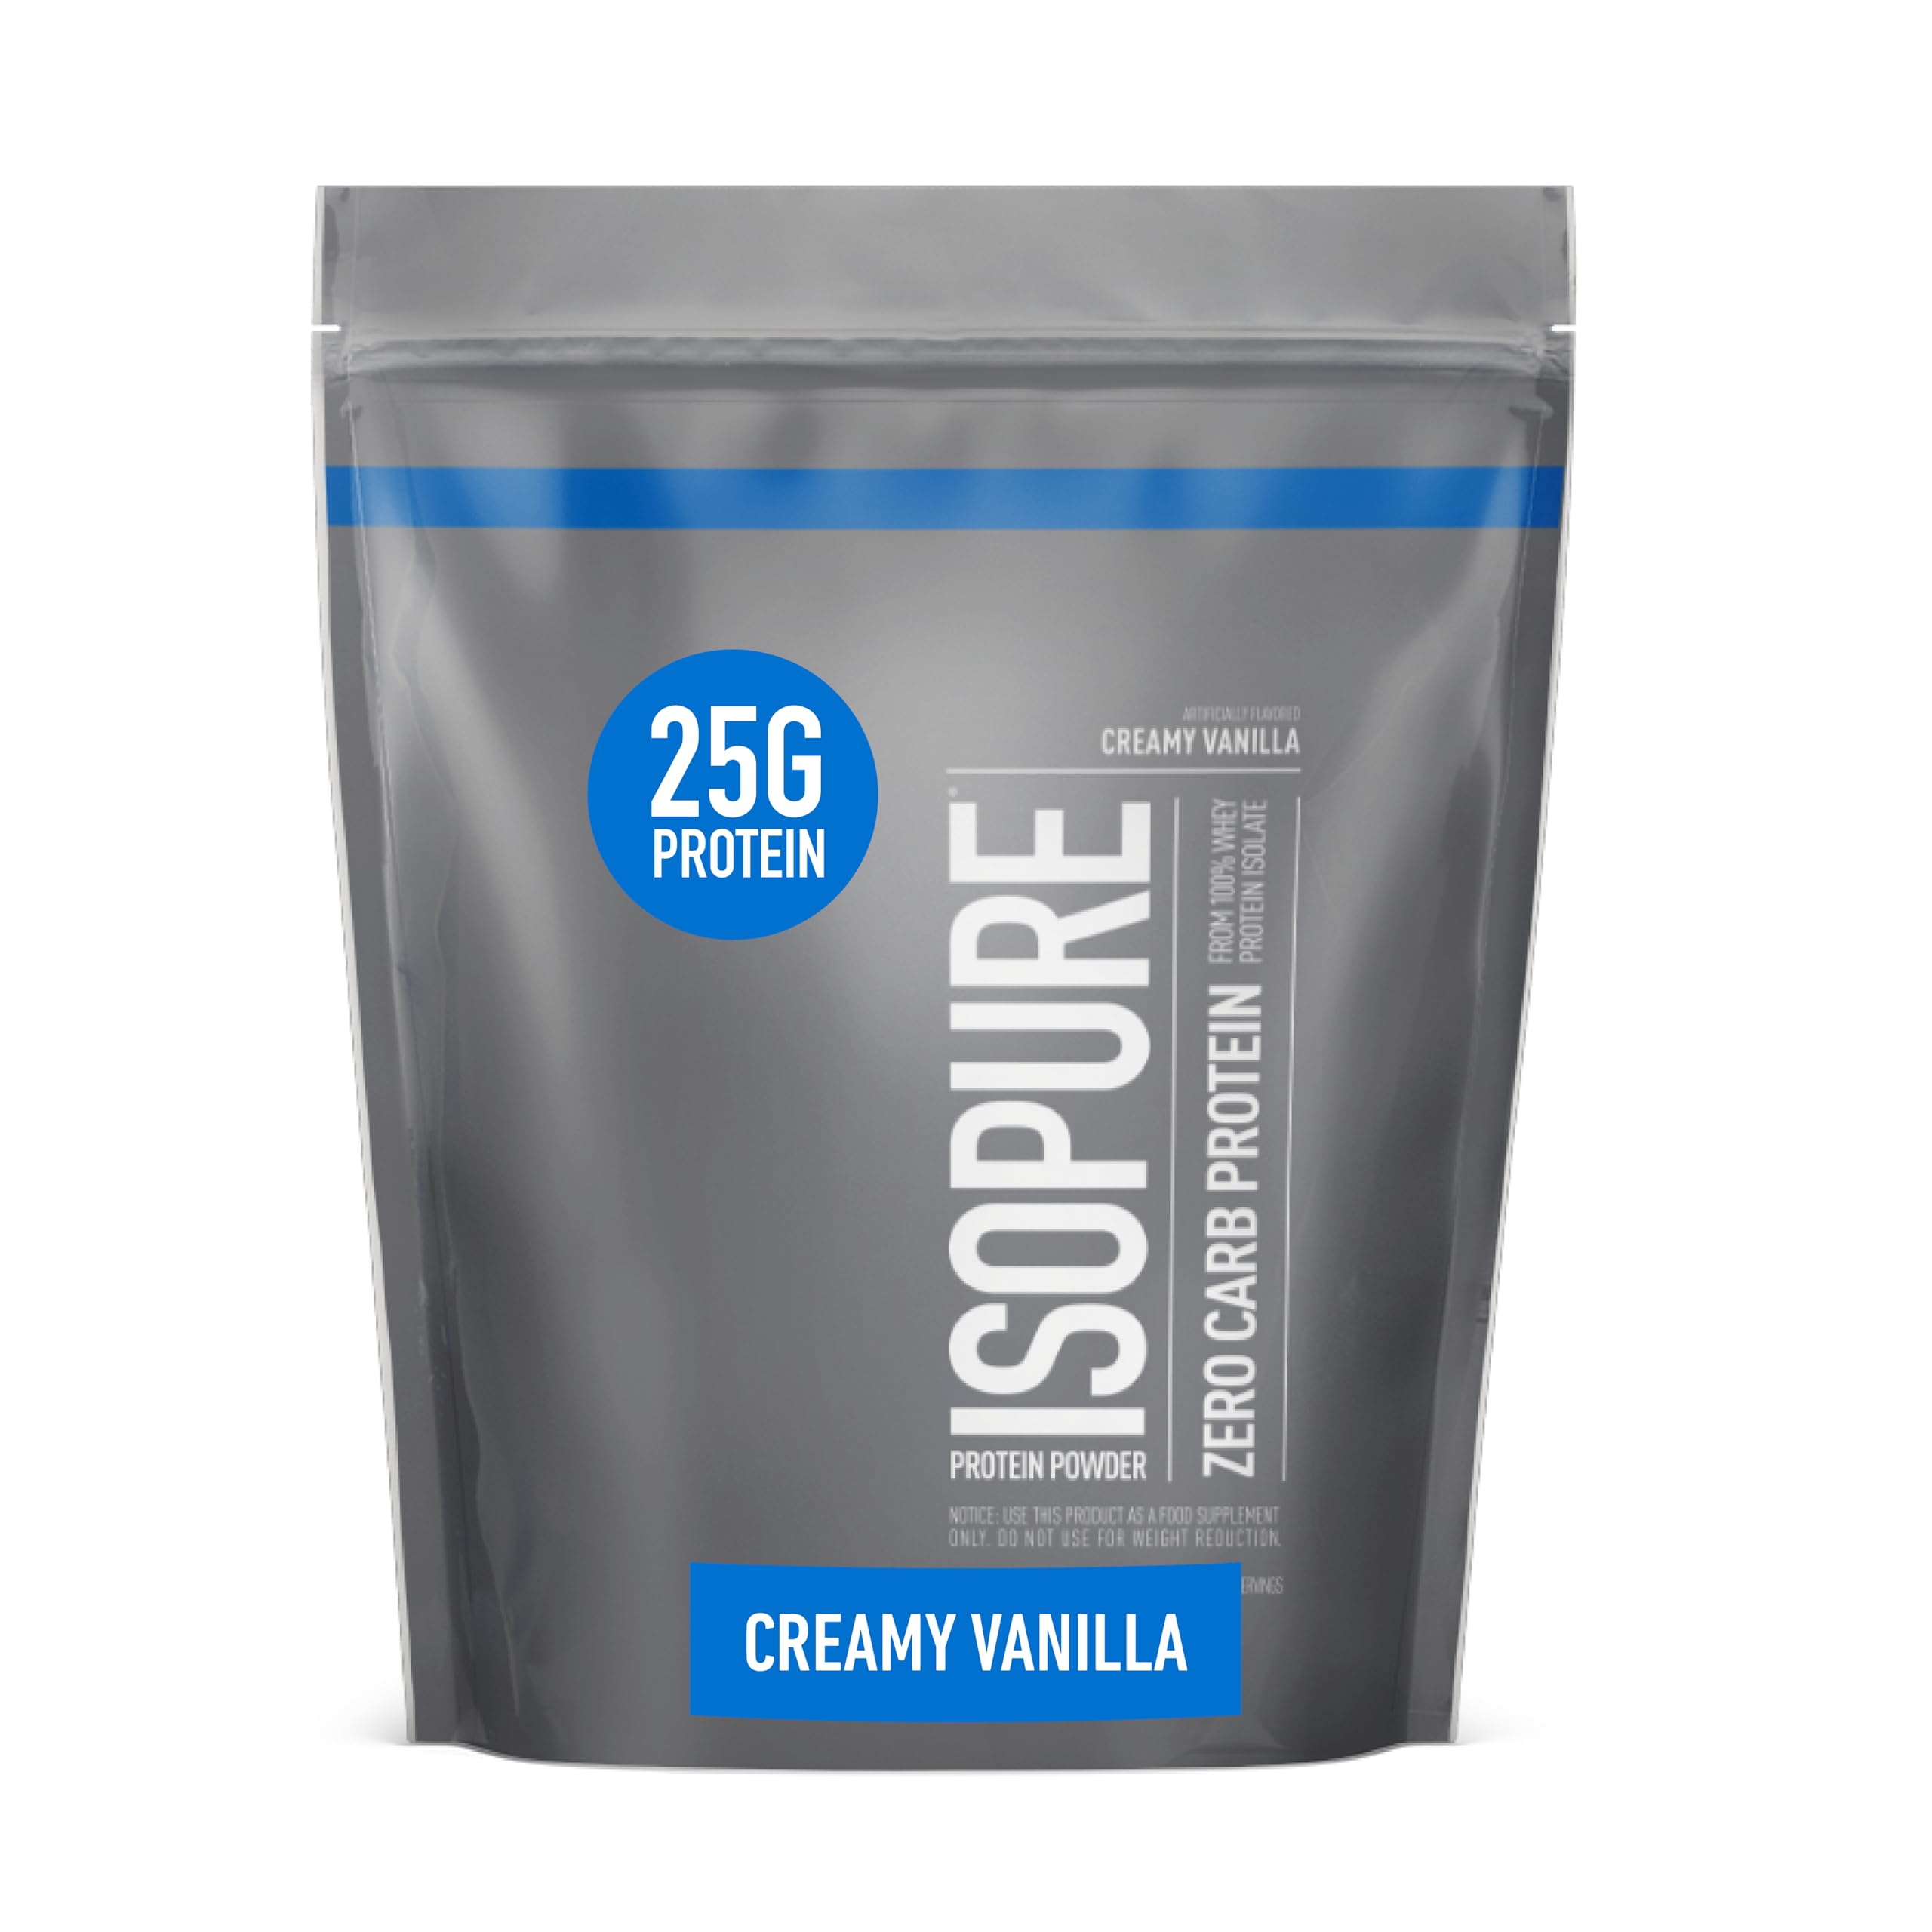 Isopure Creamy Vanilla Whey Isolate Protein Powder with Vitamin C & Zinc for Immune Support & Unflavored Protein, Whey Isolate, 25g Protein